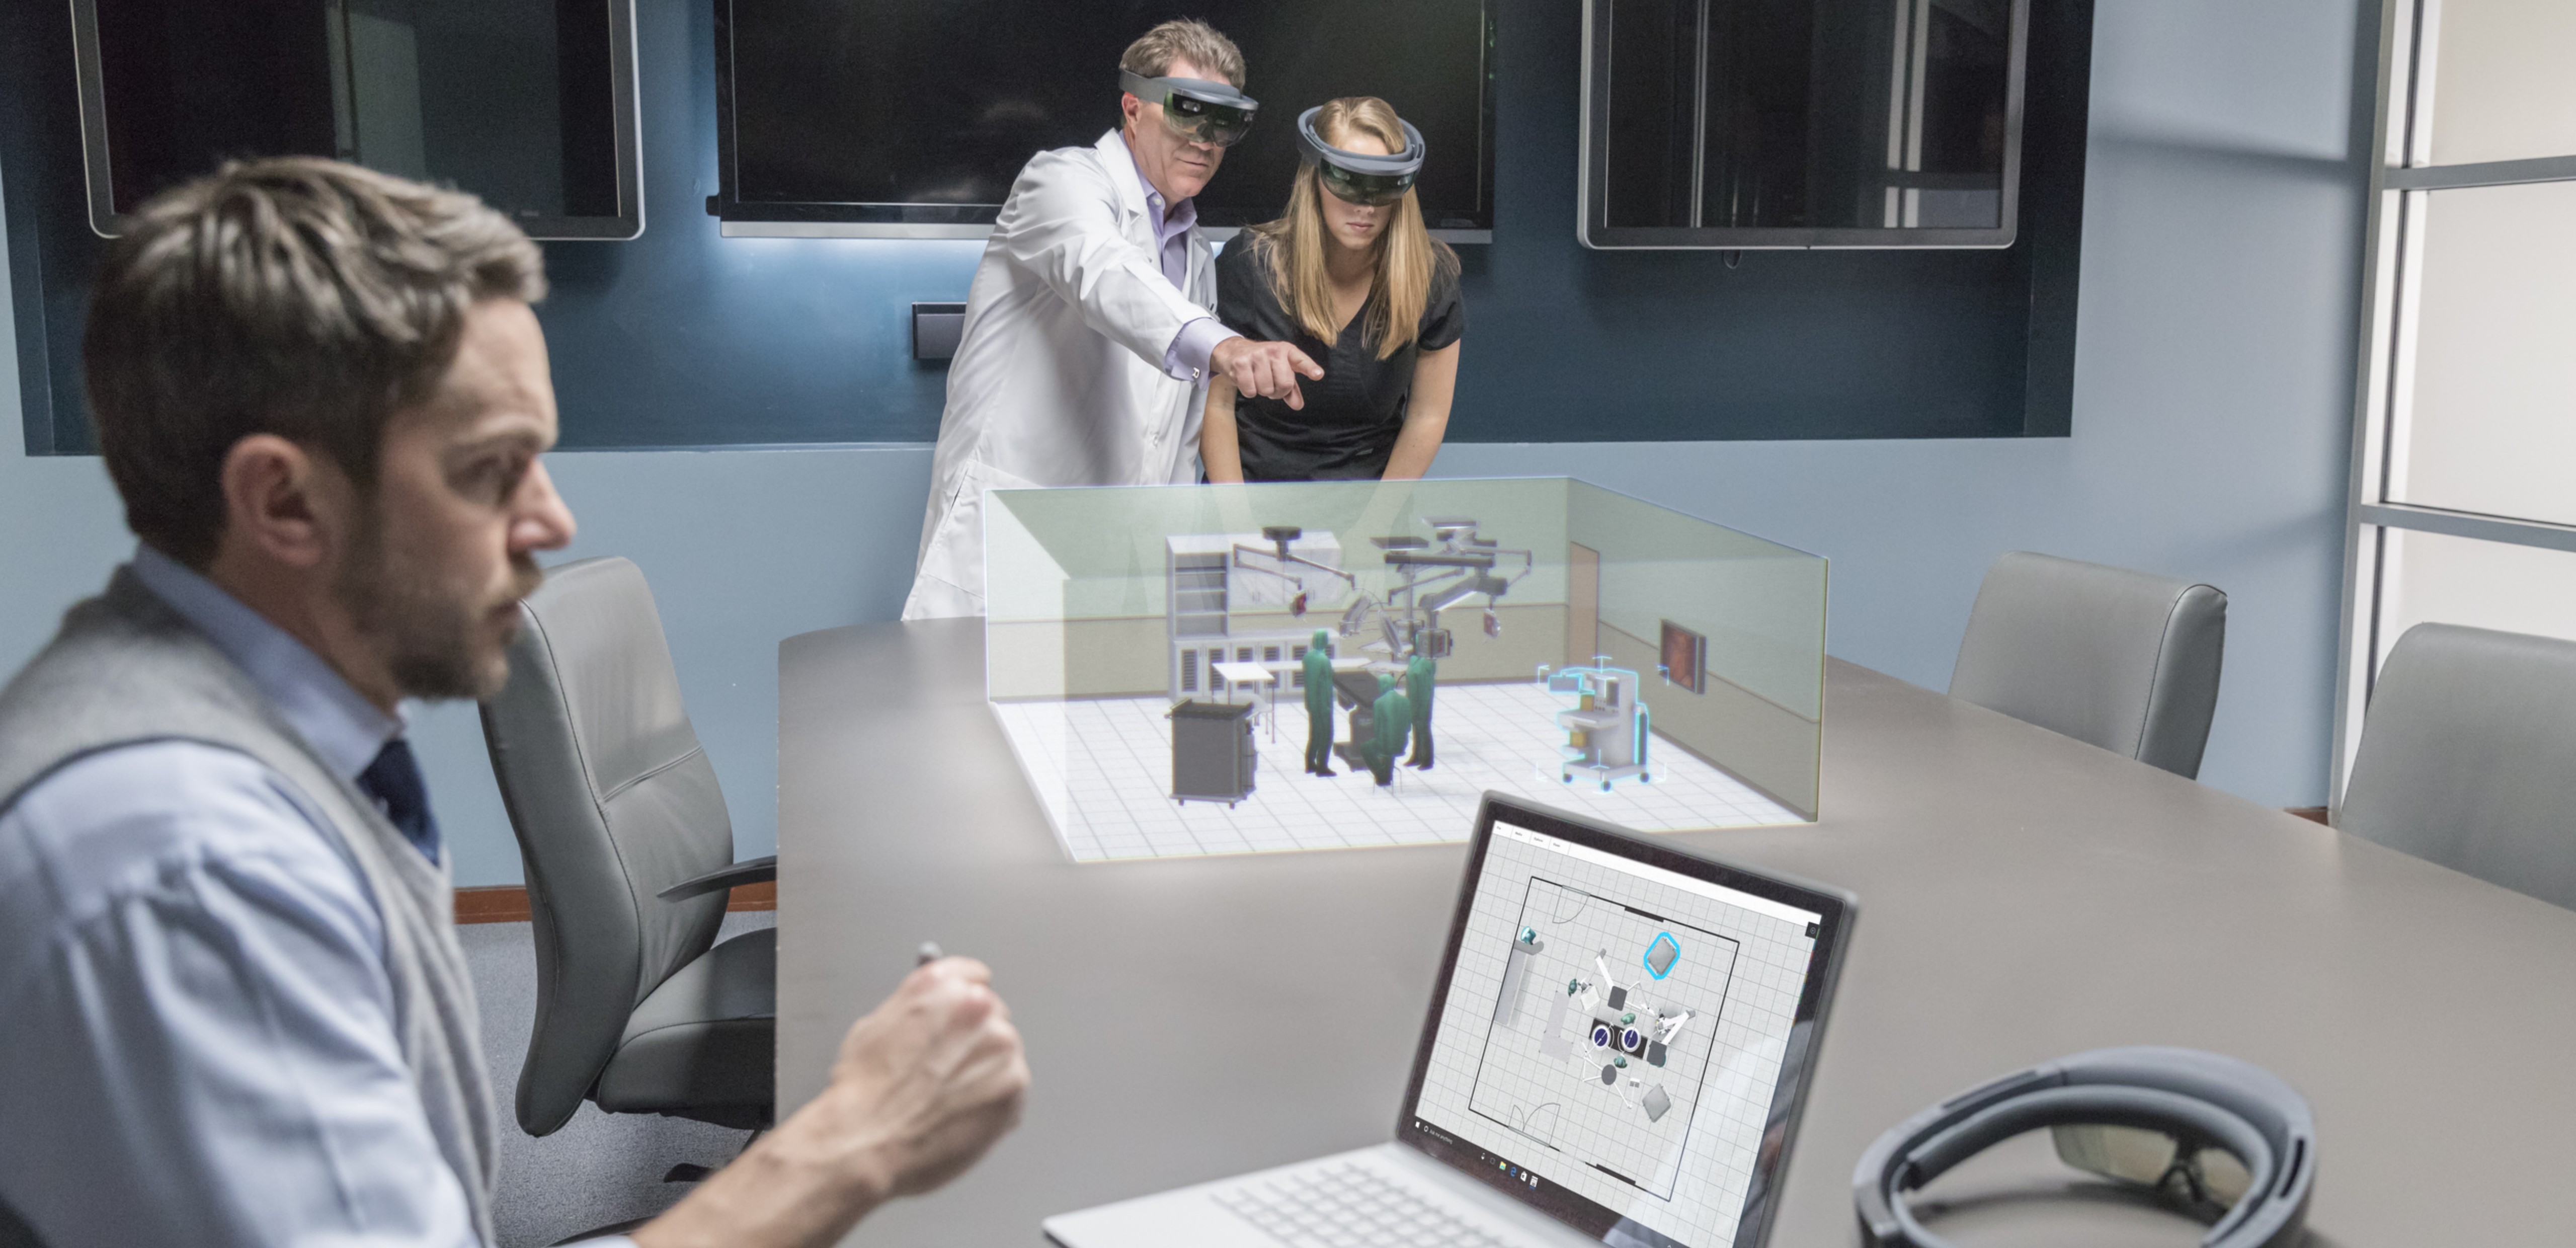 Today, we celebrate HoloLens turning one years old.